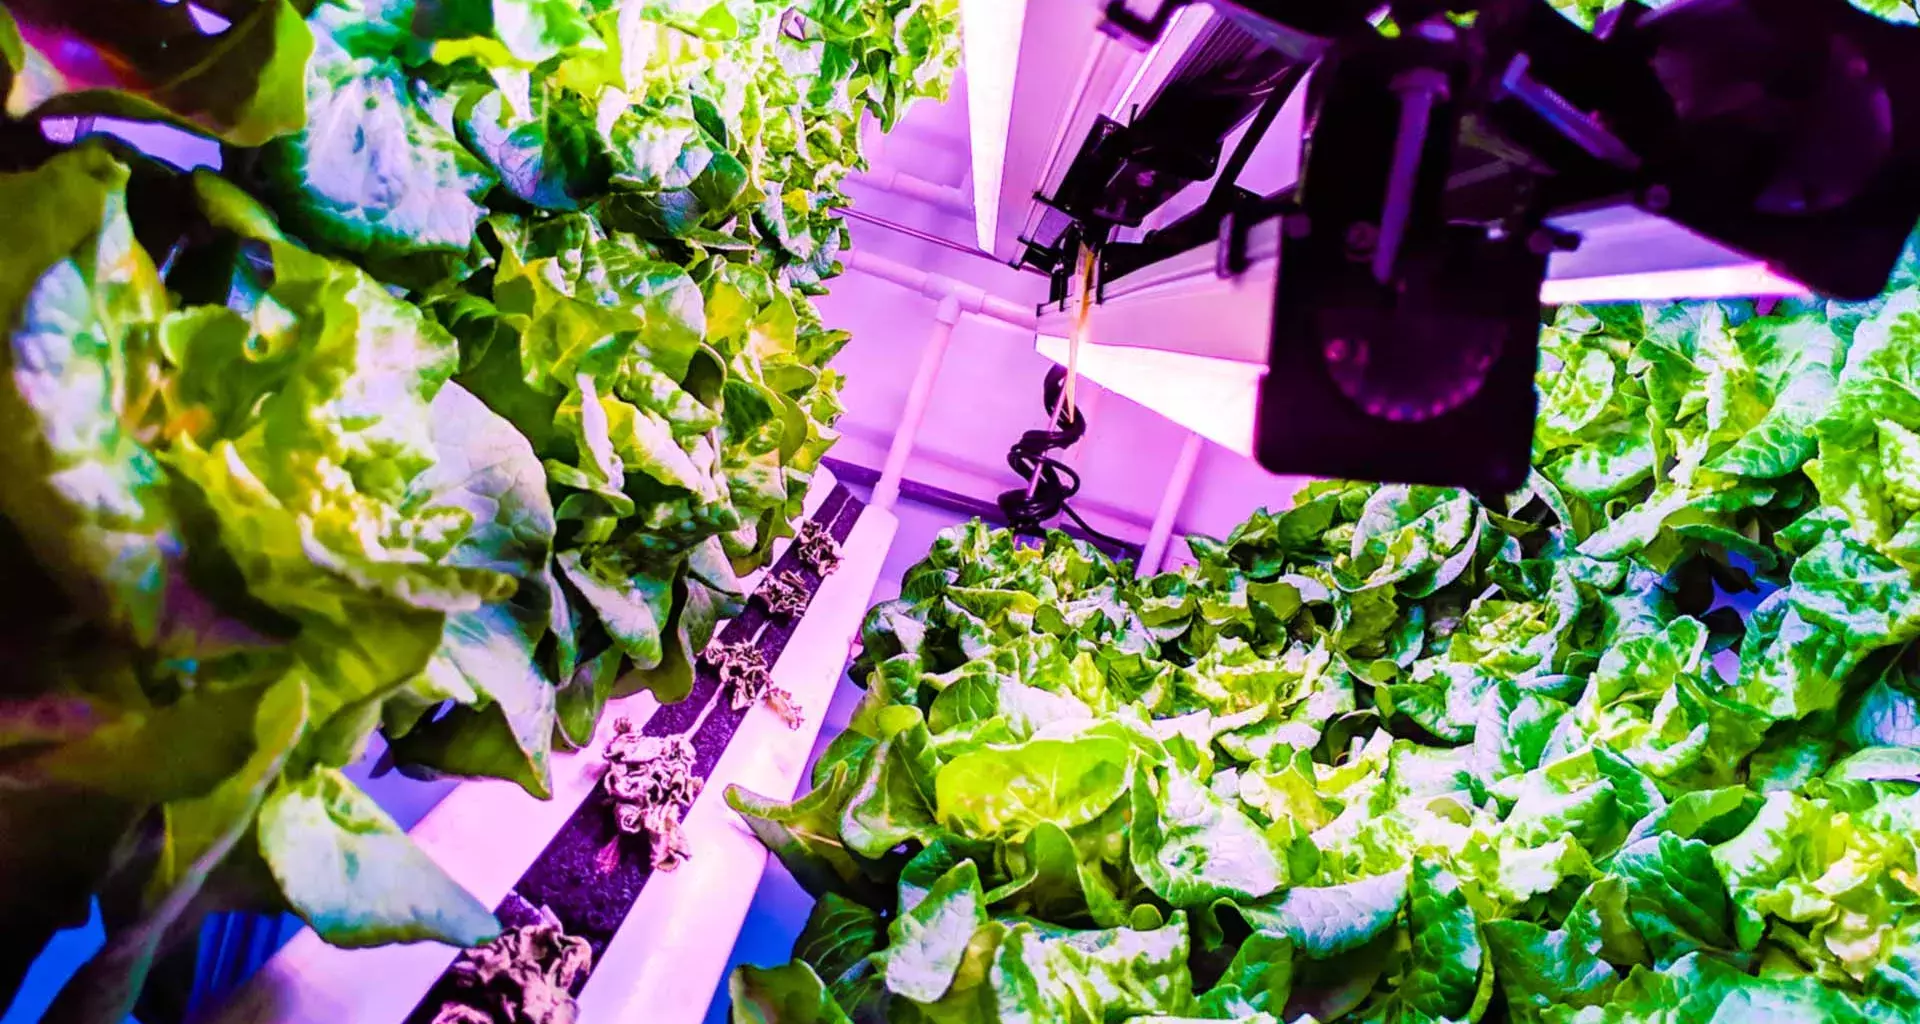 Plant wherever you like! The Mexican startup that’s innovating in agriculture